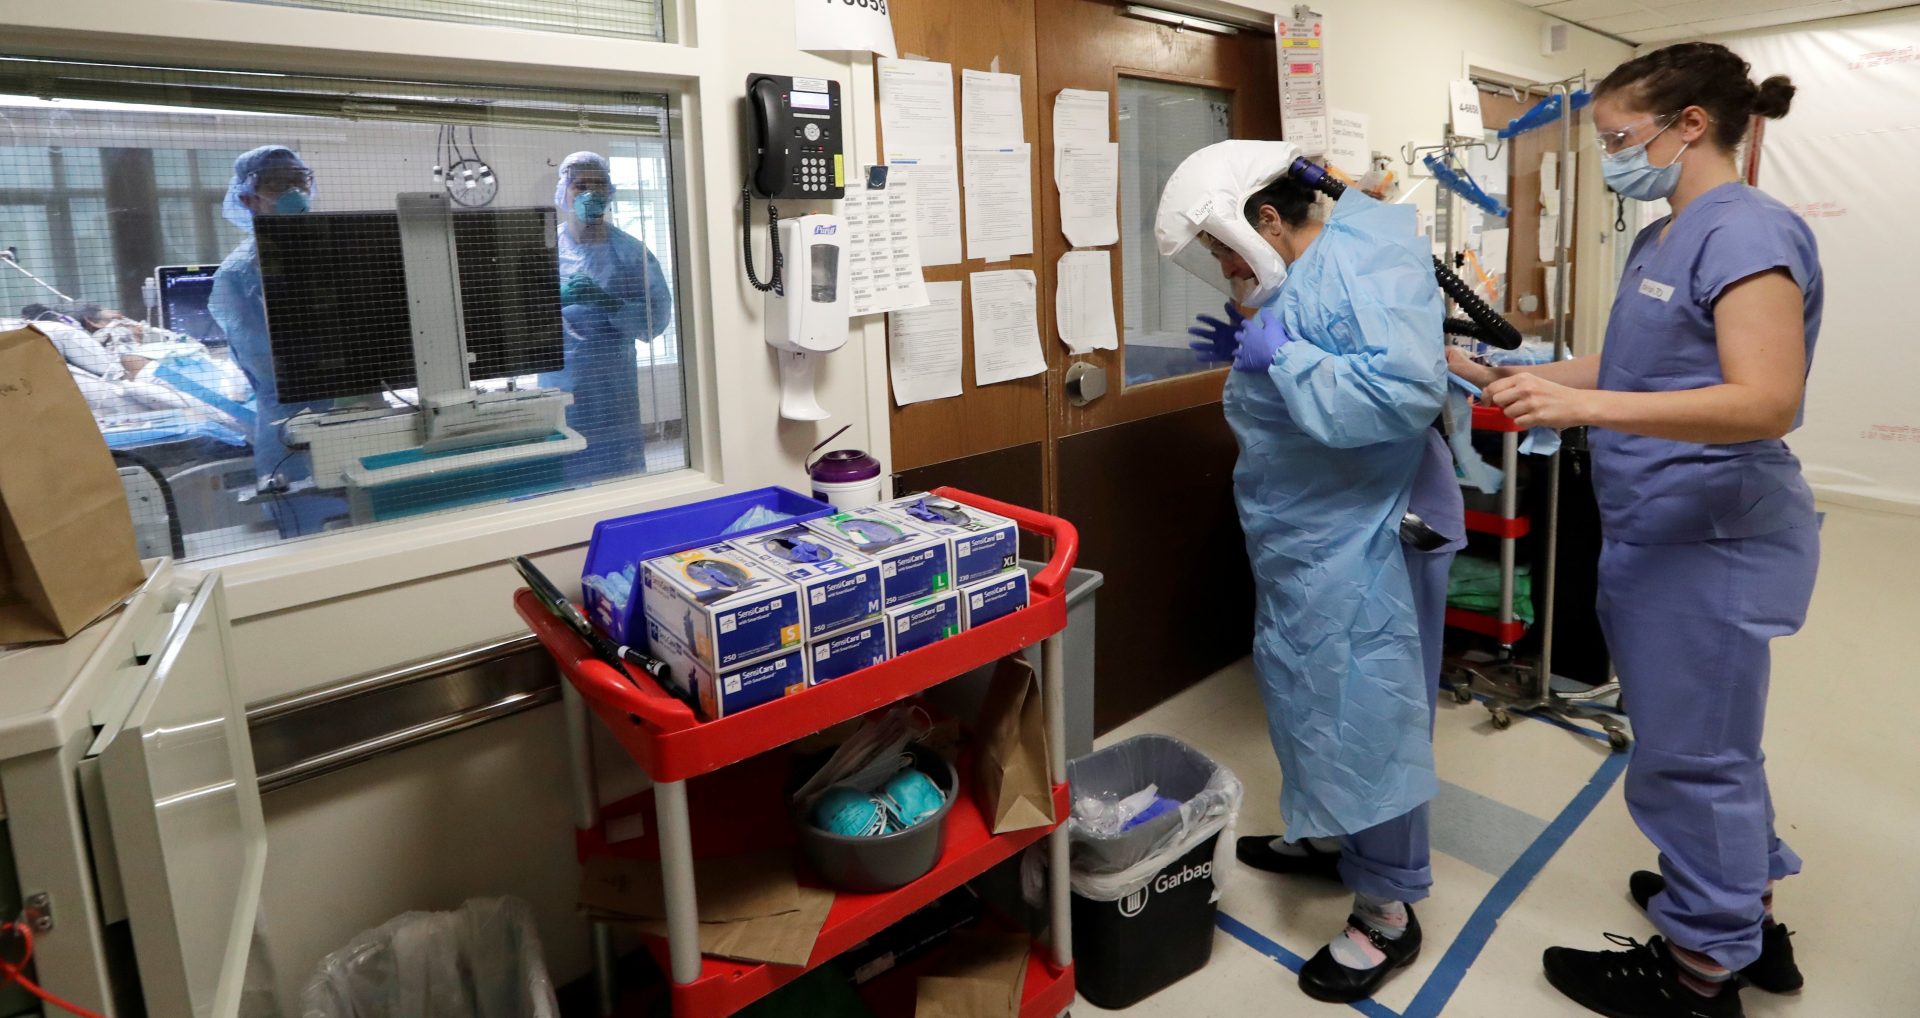 A medical worker is assisted into PPE while standing inside an area marked in blue tape, a "warm" area, before stepping into a patient's room in the COVID-19 Intensive Care Unit at Harborview Medical Center Friday, May 8, 2020, in Seattle.